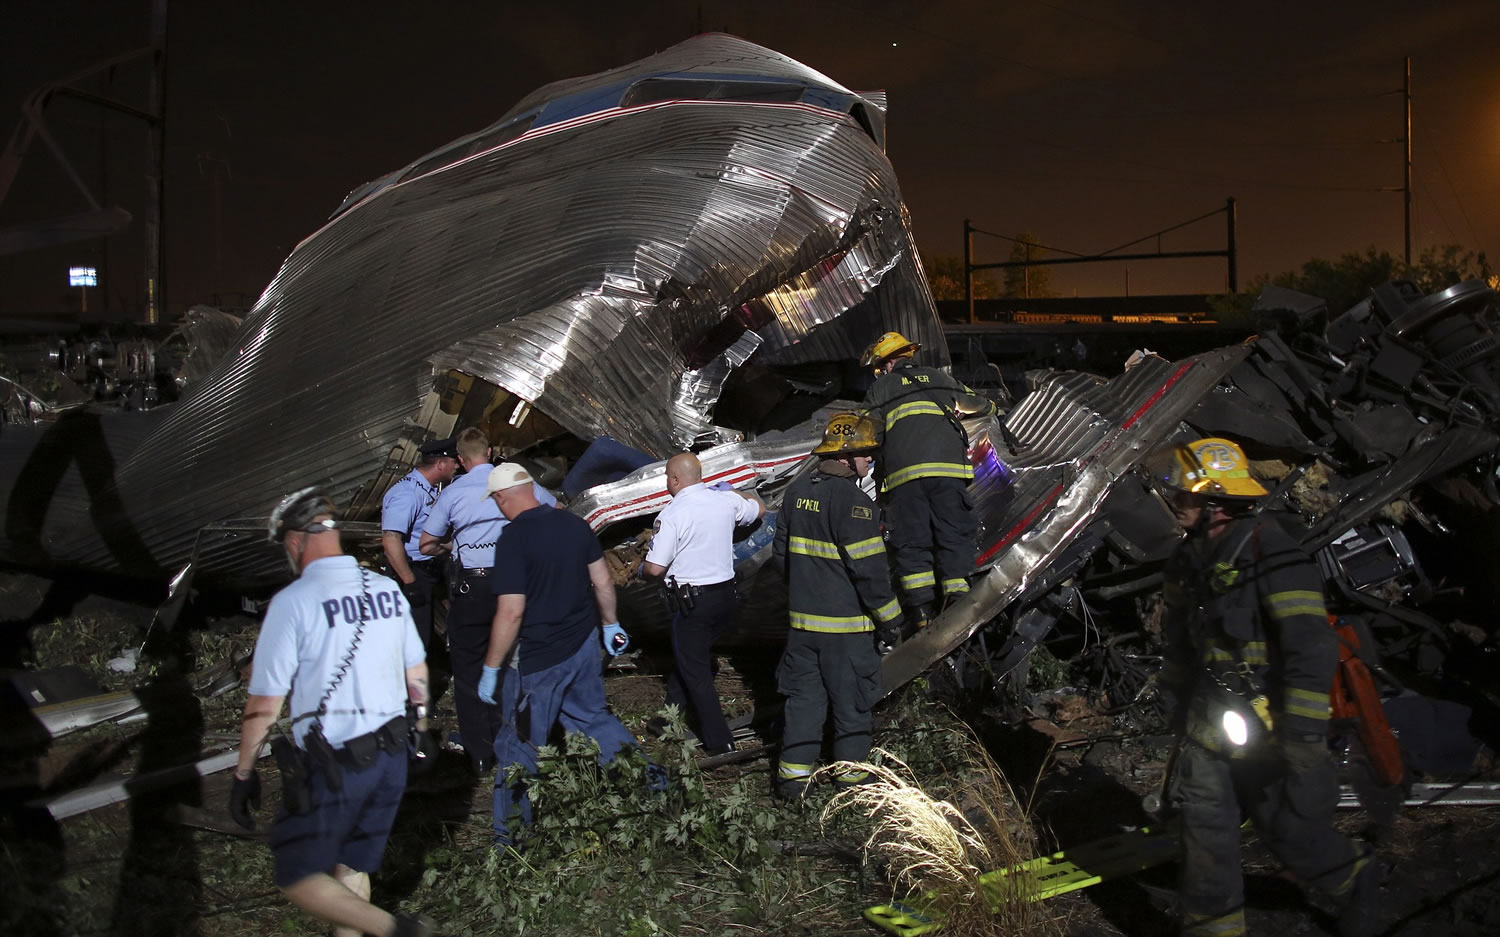 Emergency personnel work the scene of a train wreck Tuesday in Philadelphia.